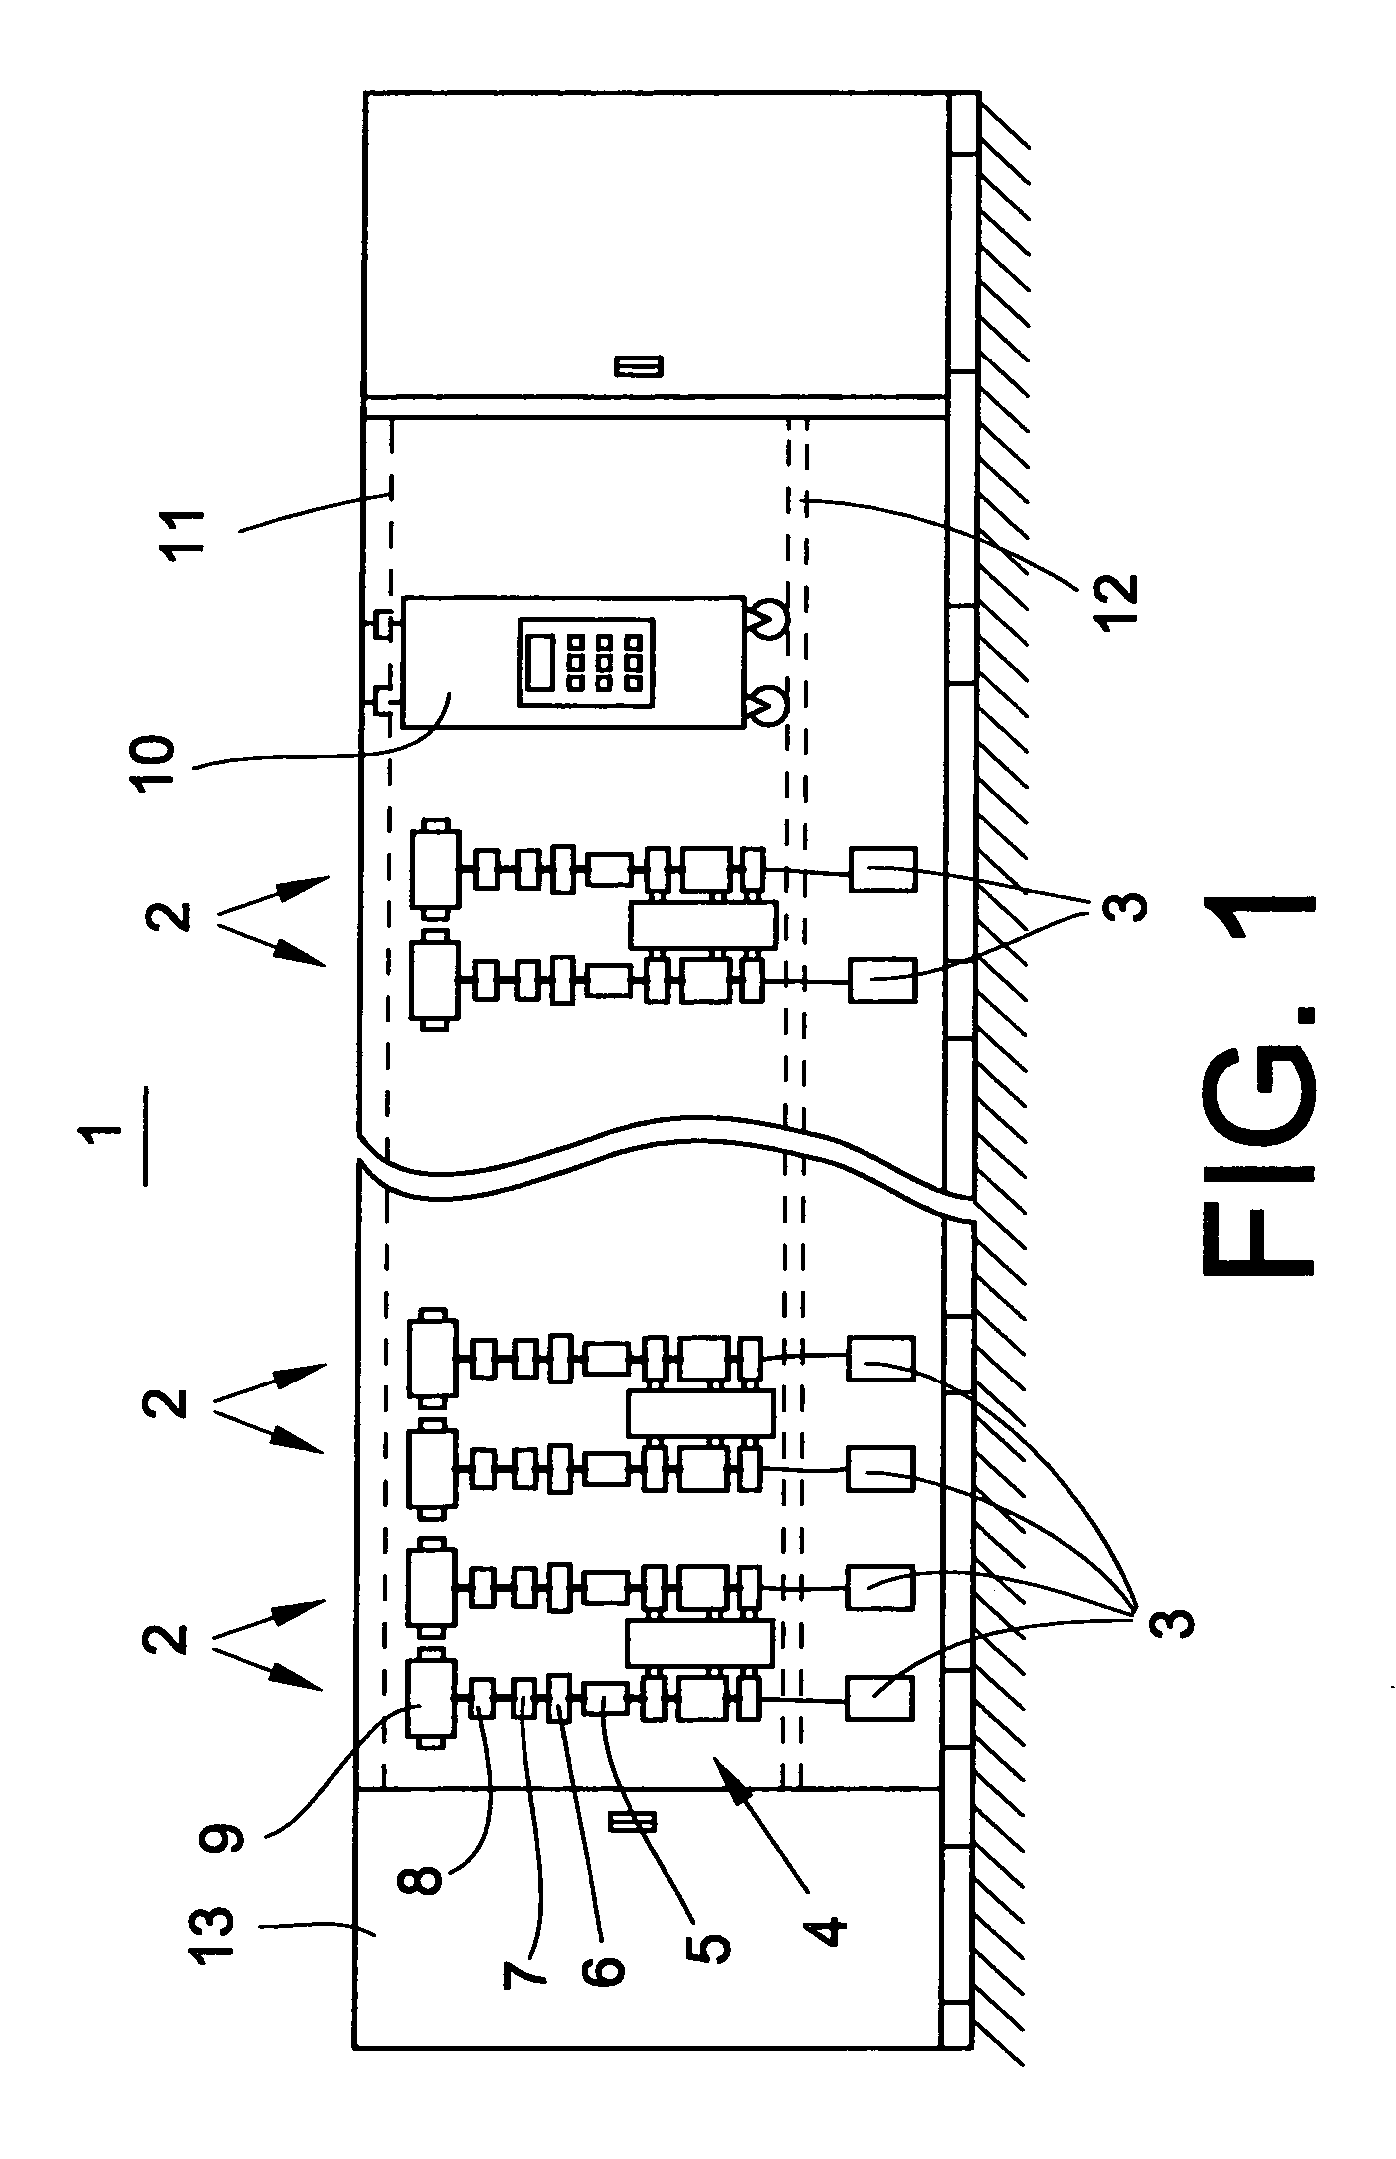 Spinning device for producing a yarn by means of a circulating air flow